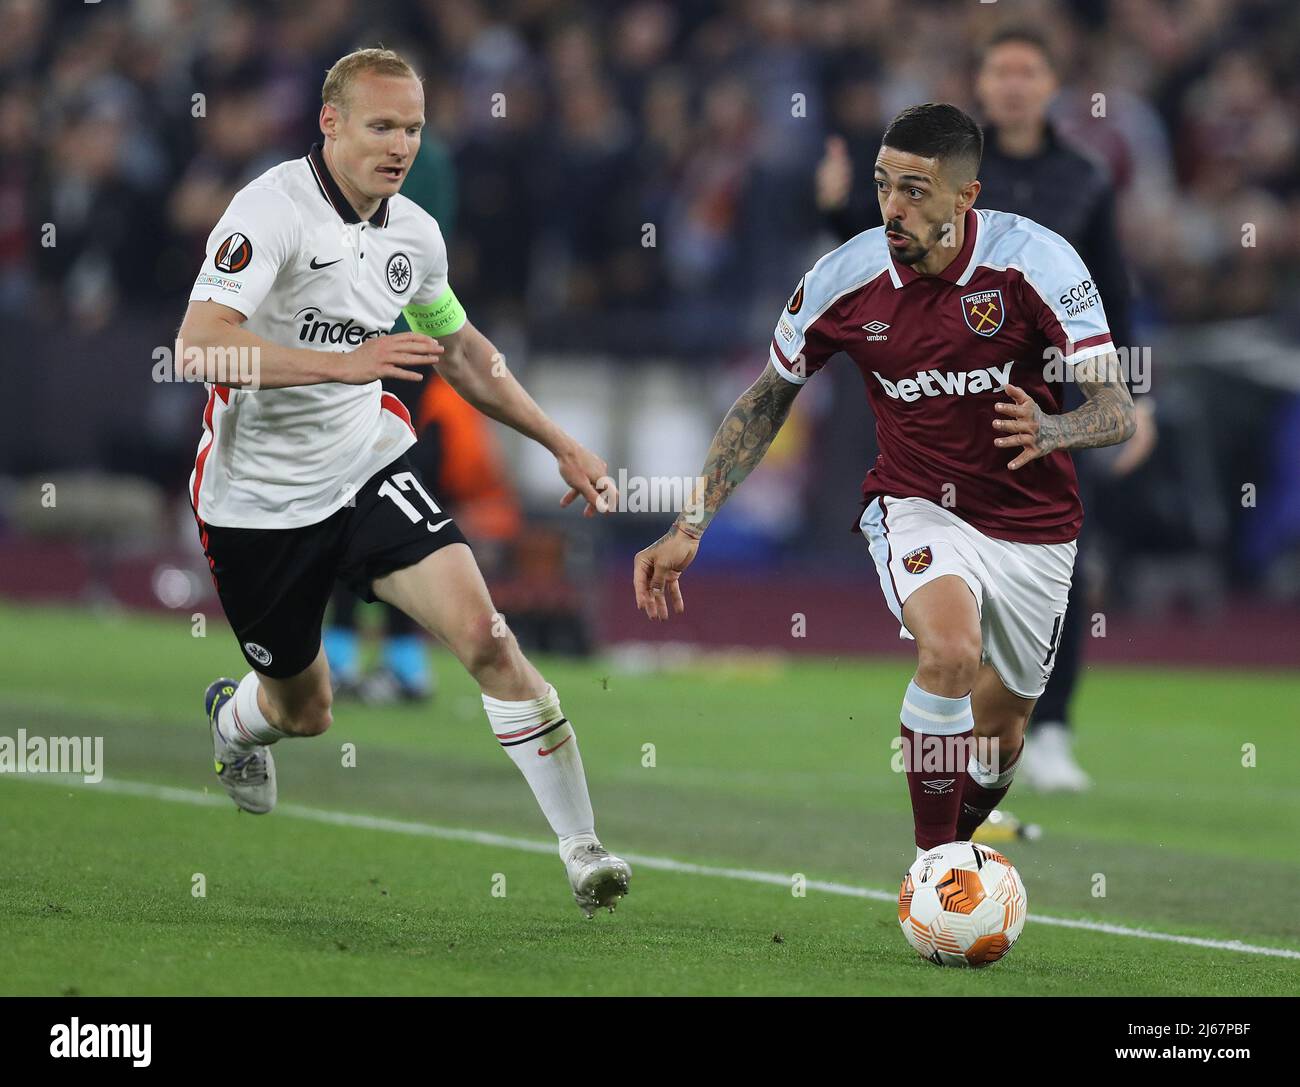 London, UK. 28th April 2022. Manuel Lanzini of West Ham United and Sebastian Rode of Eintracht Frankfurt challenge for the ball during the UEFA Europa League match at the London Stadium, London. Picture credit should read: Paul Terry / Sportimage Credit: Sportimage/Alamy Live News Stock Photo